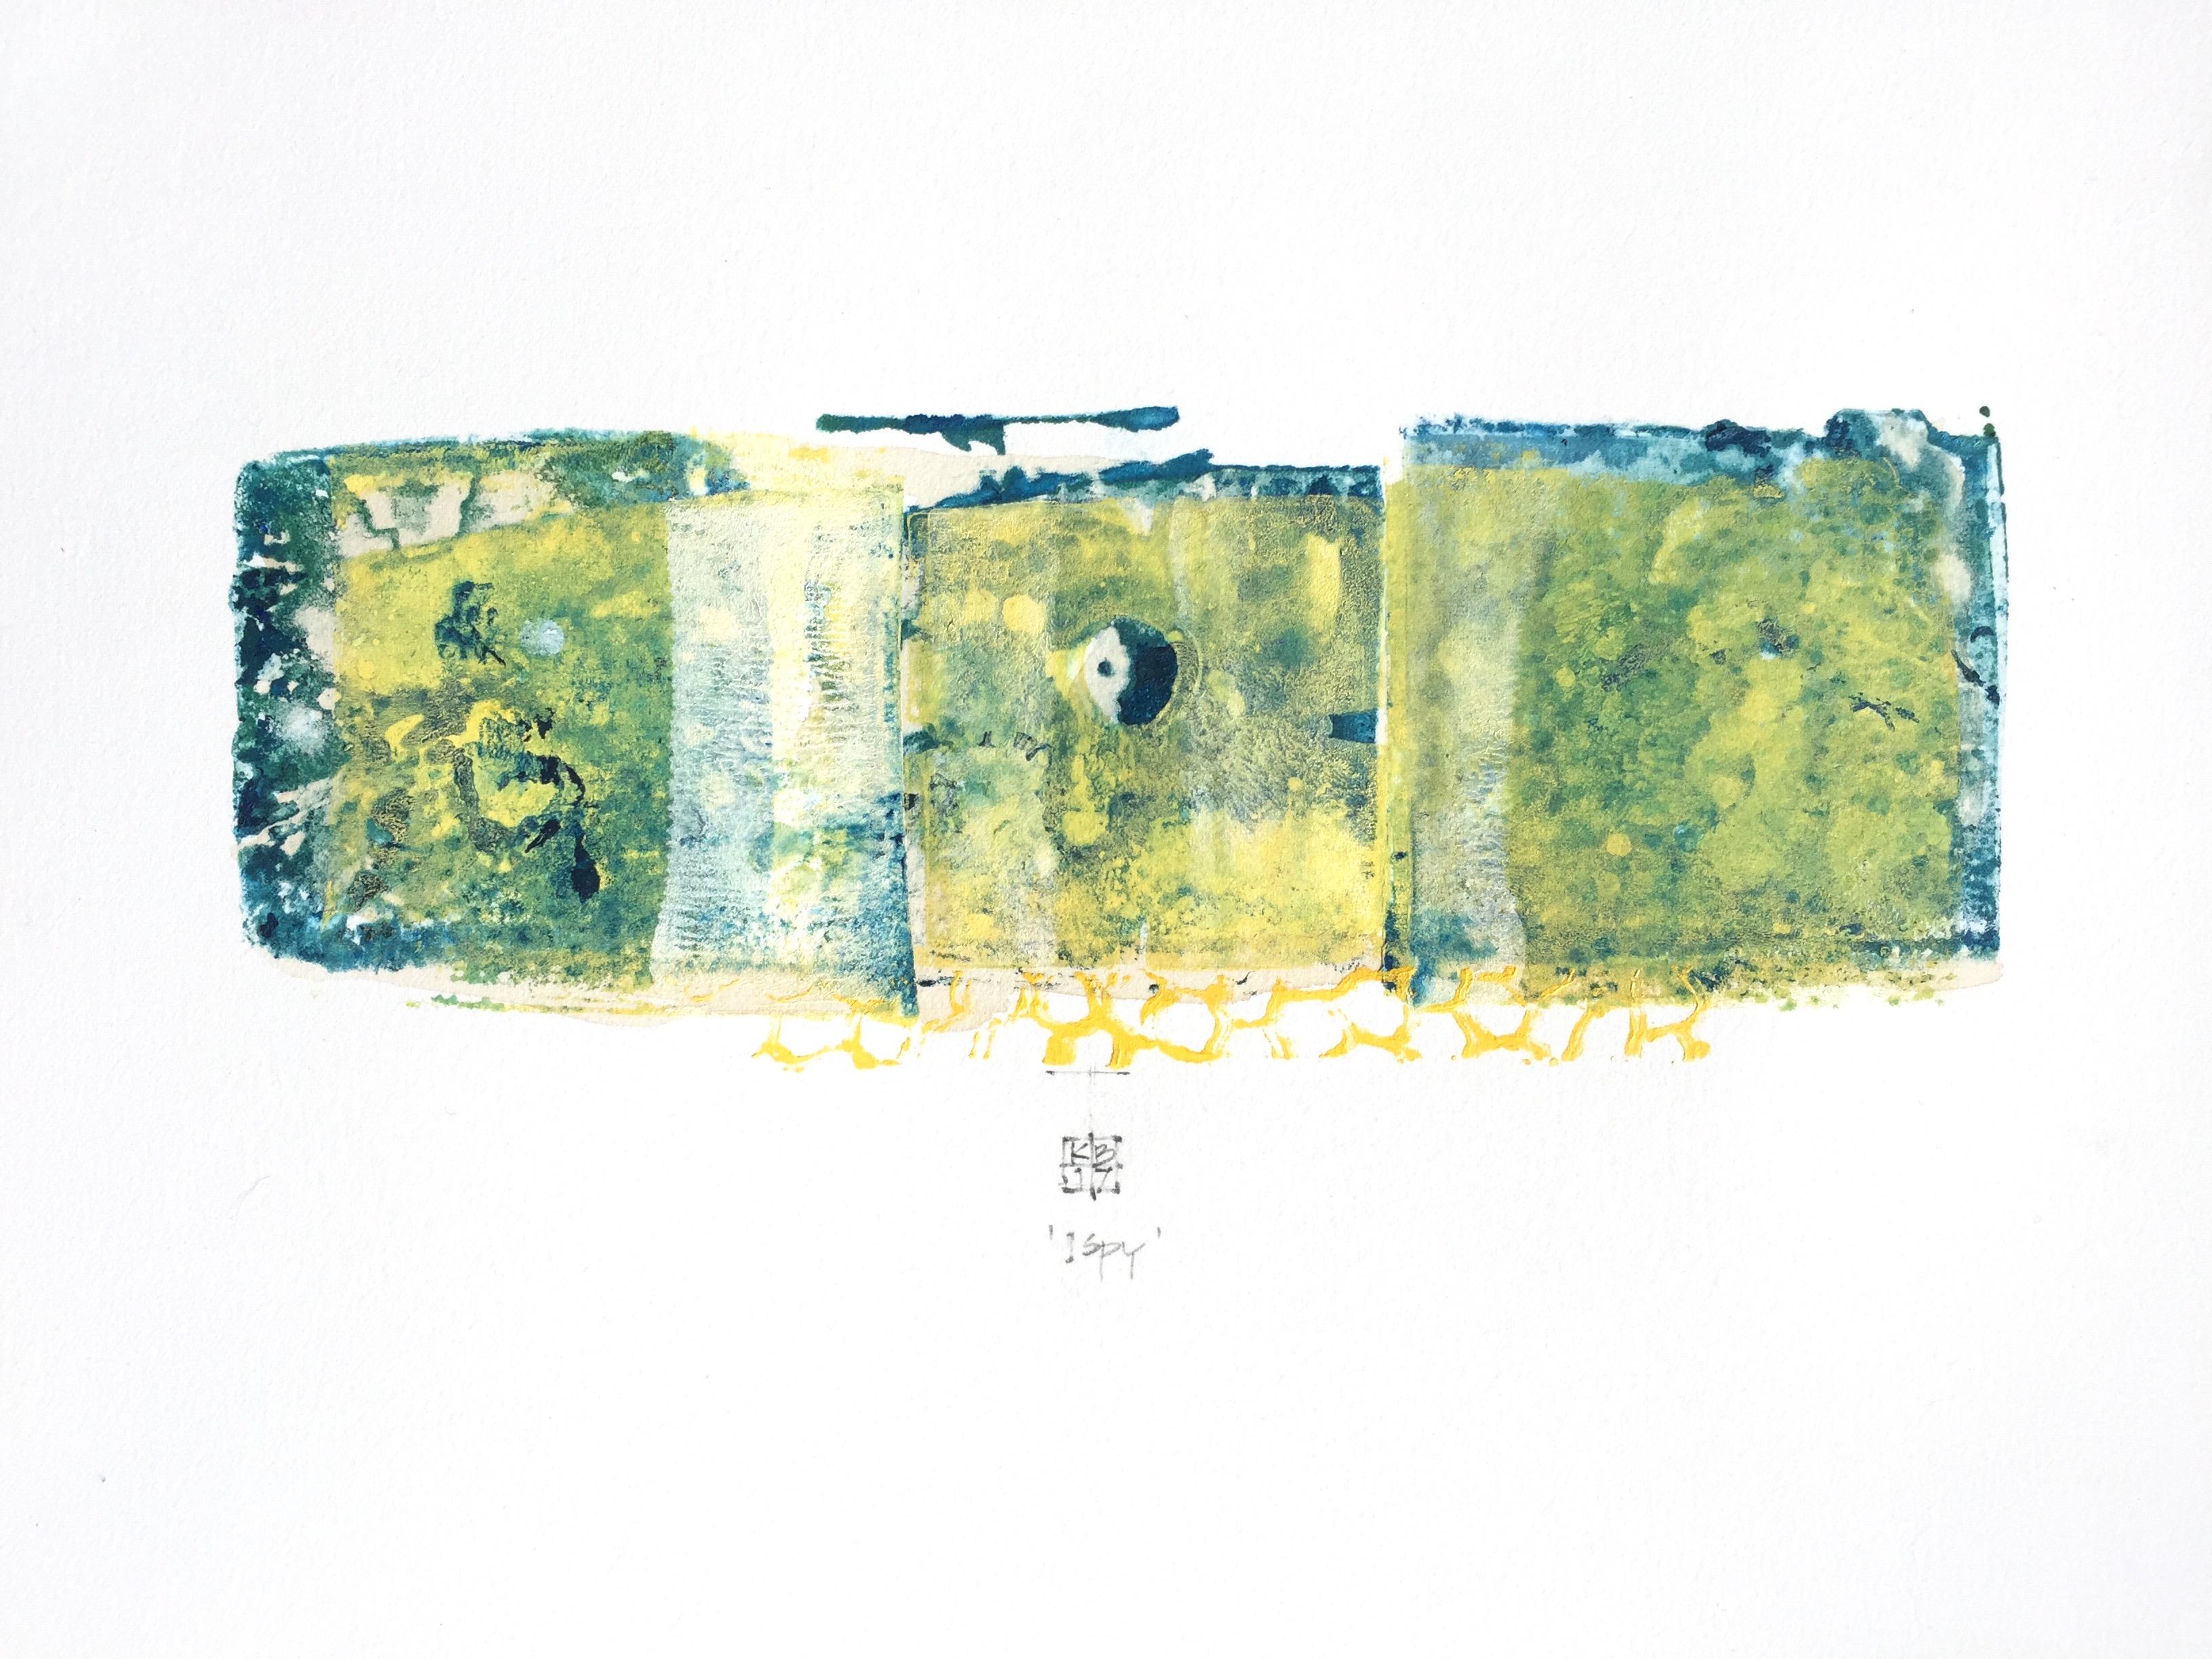 Karin Bruckner Abstract Print - ISpy, abstract mixed media monotype on paper, green and blue